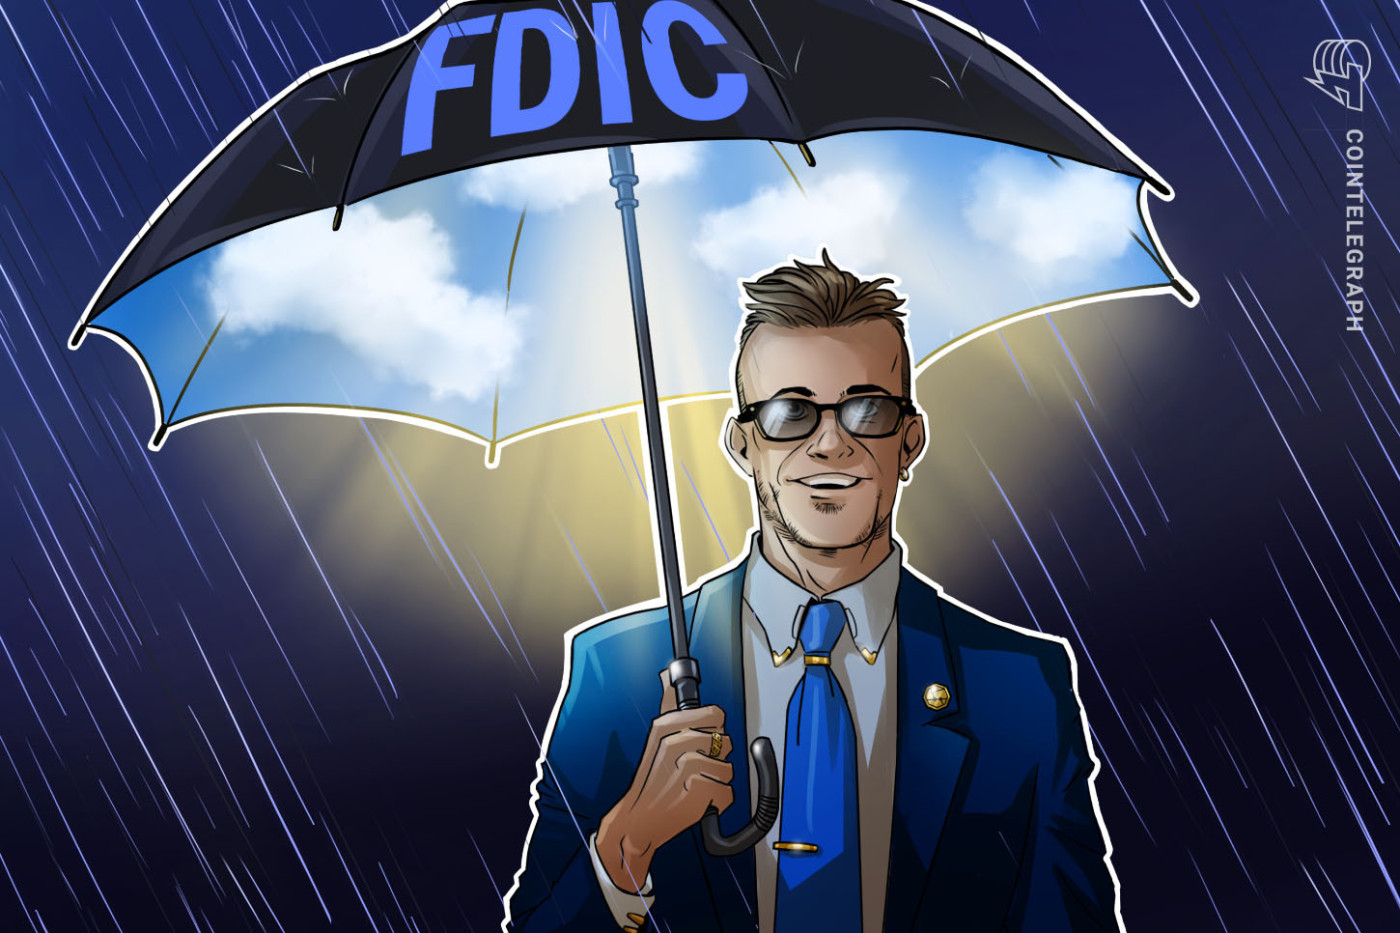 FDIC finalizes official signs for insured institutions, in hint to crypto firms